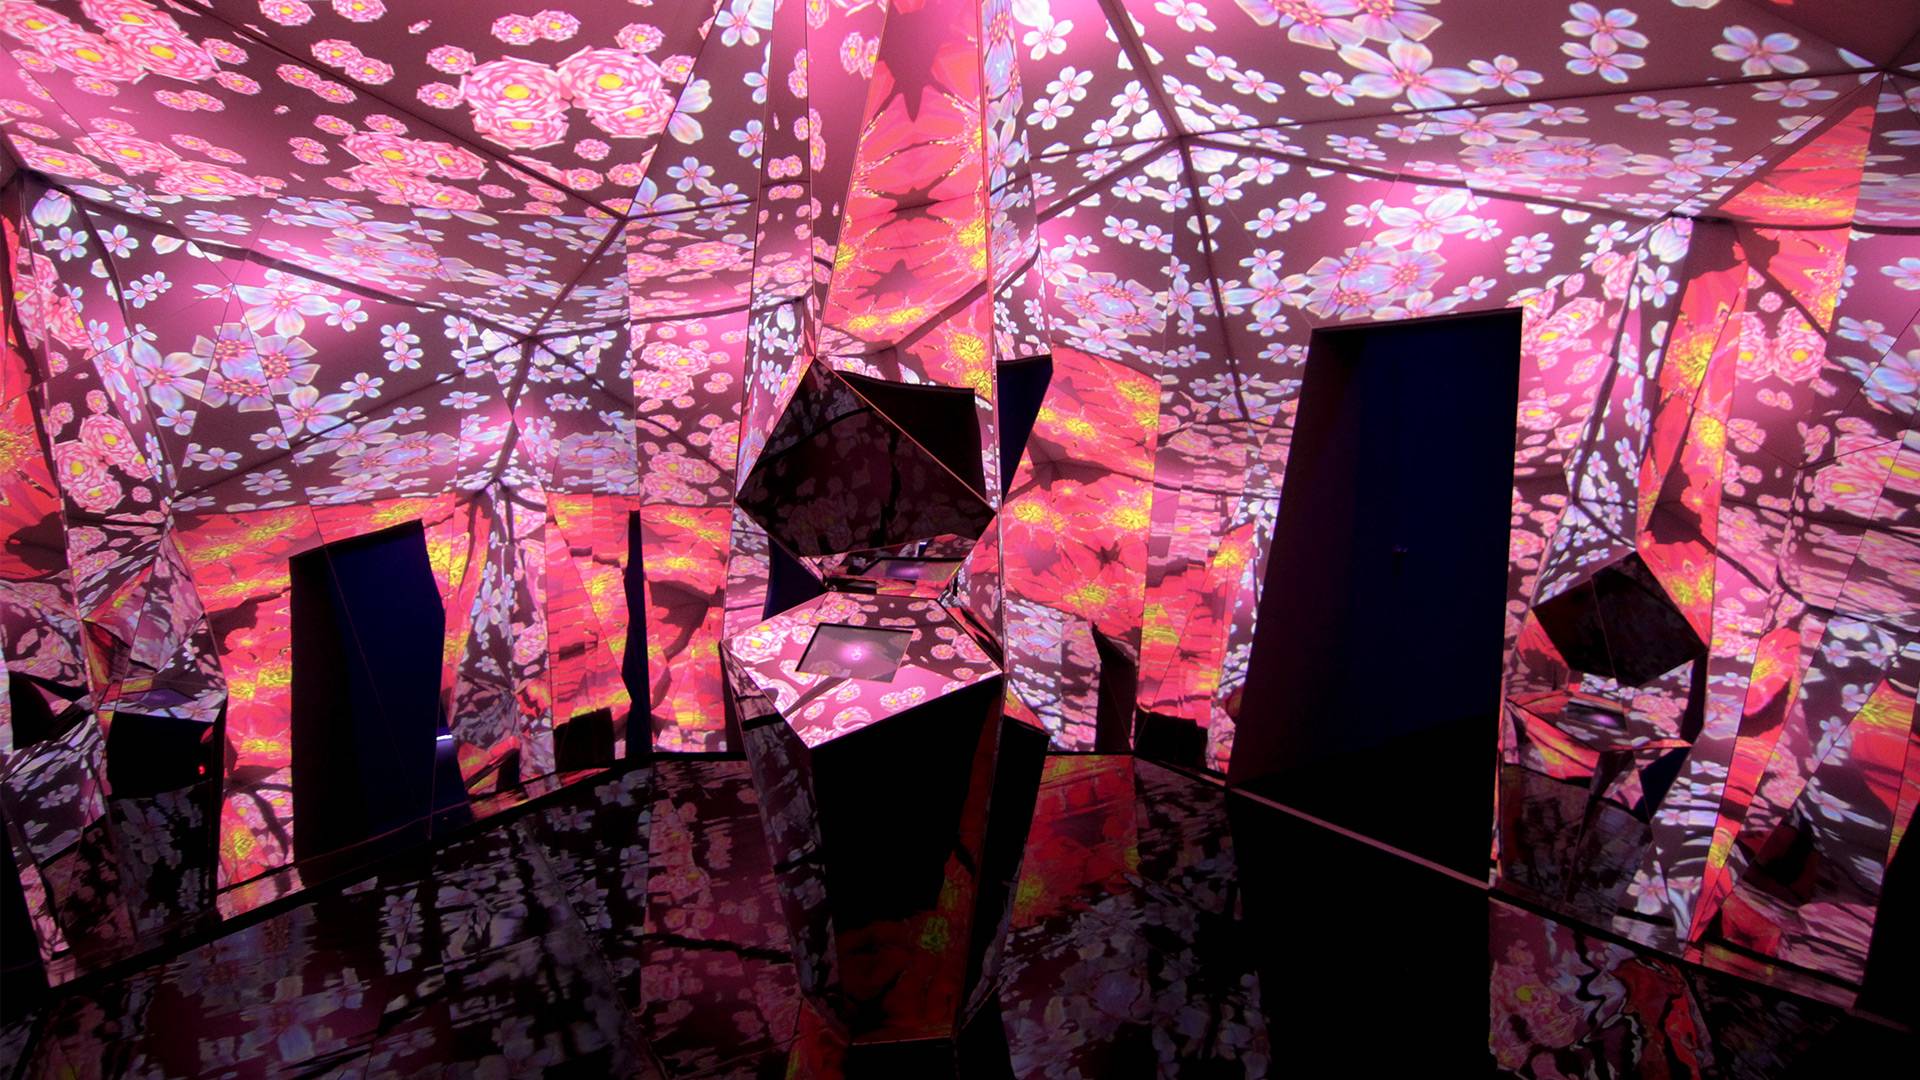 Museum of Feelings: Exhilarated Room, responsive floral kaleidoscope and mirror installation